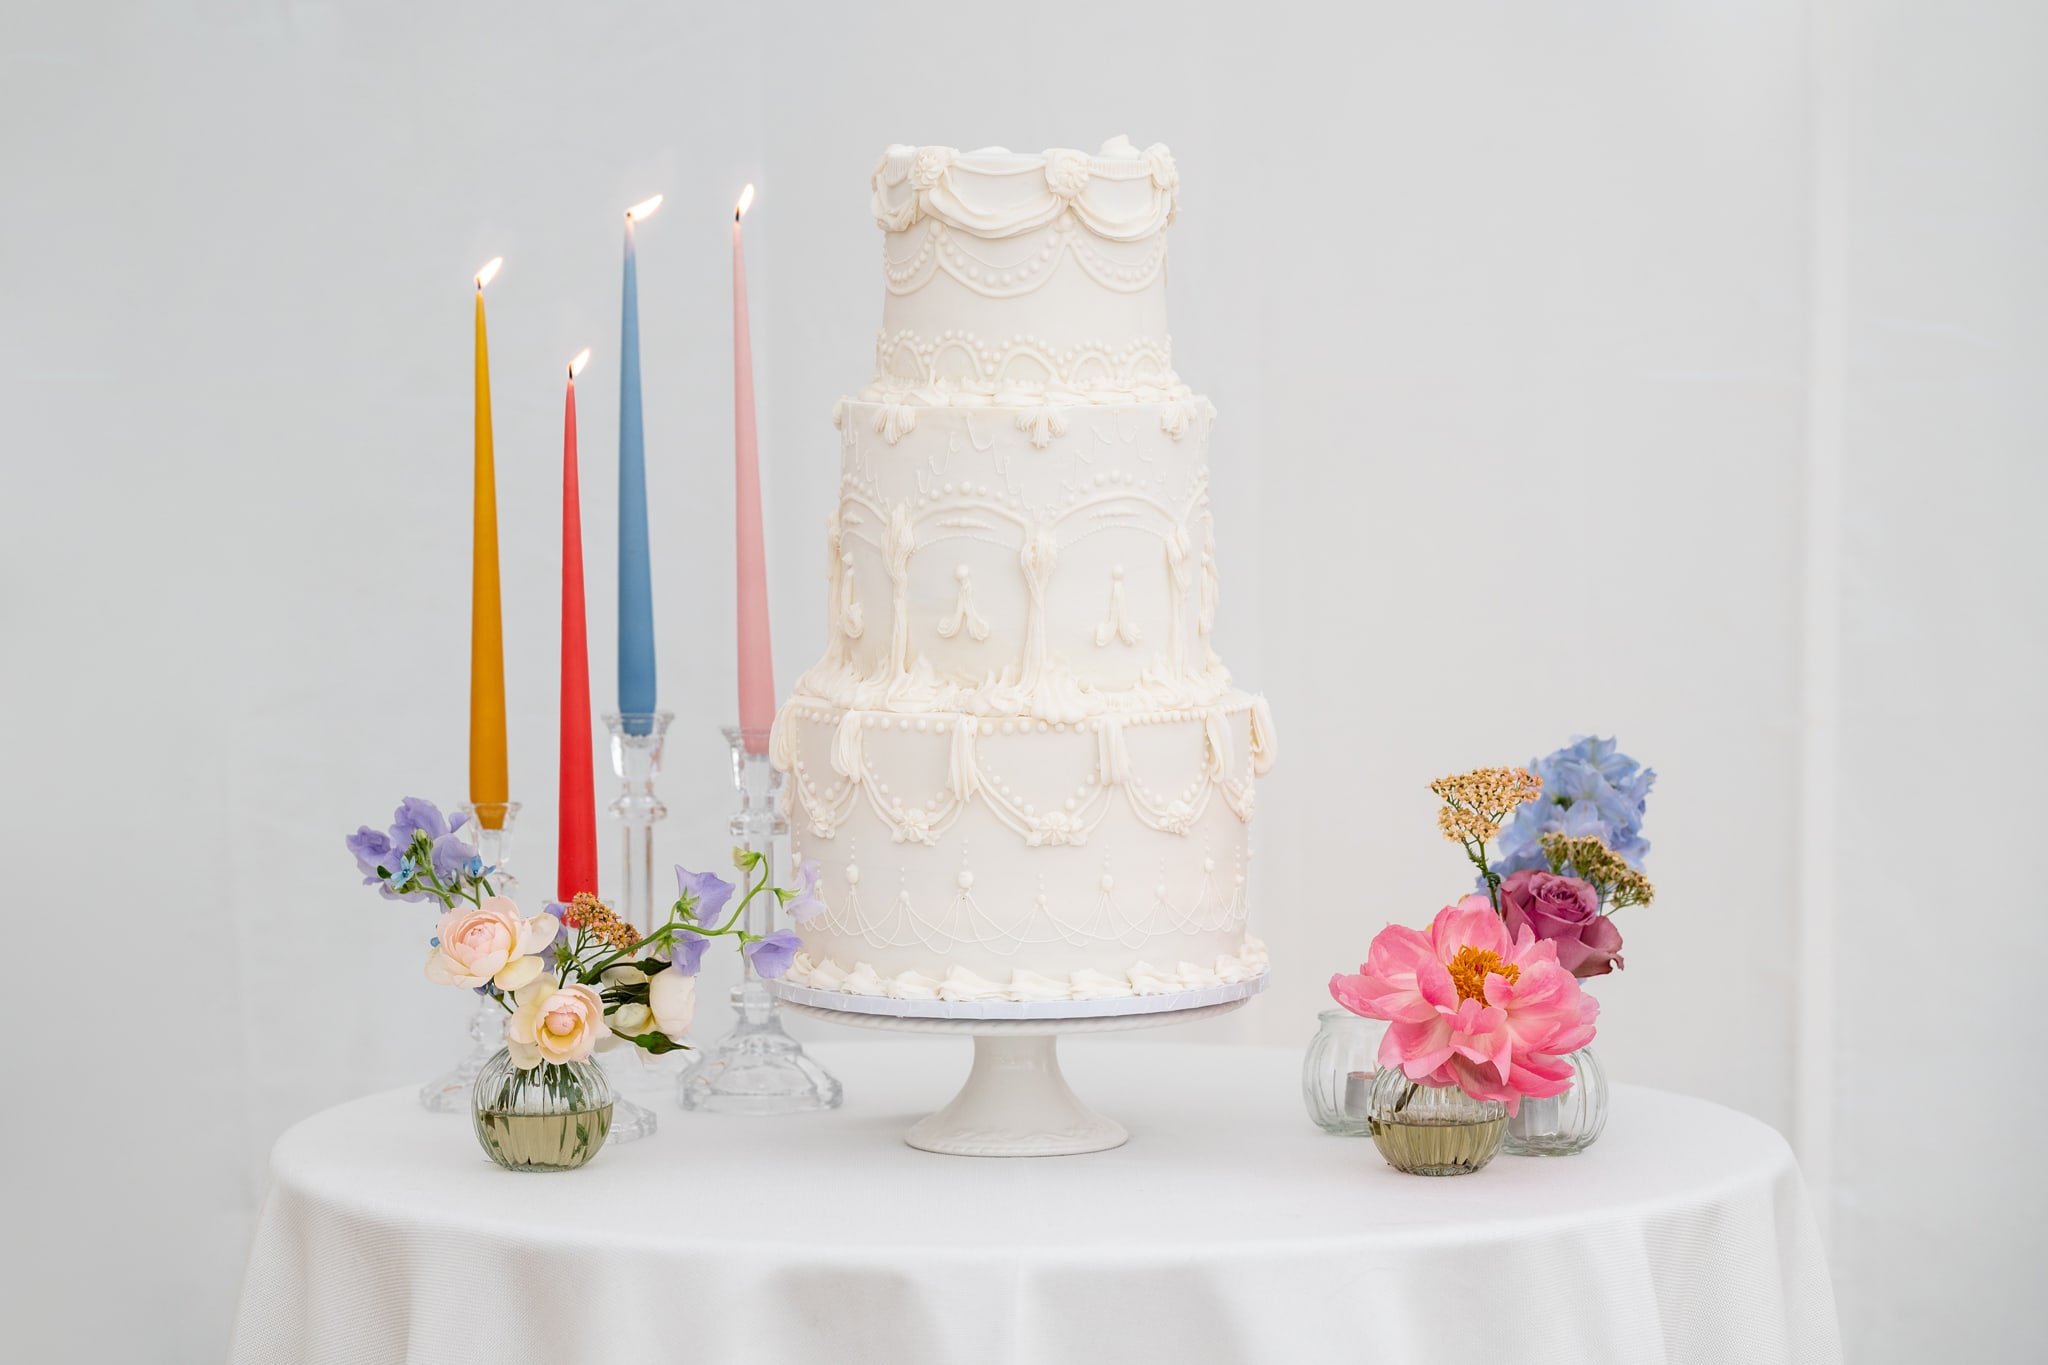 White iced wedding cake next to brightly coloured candles